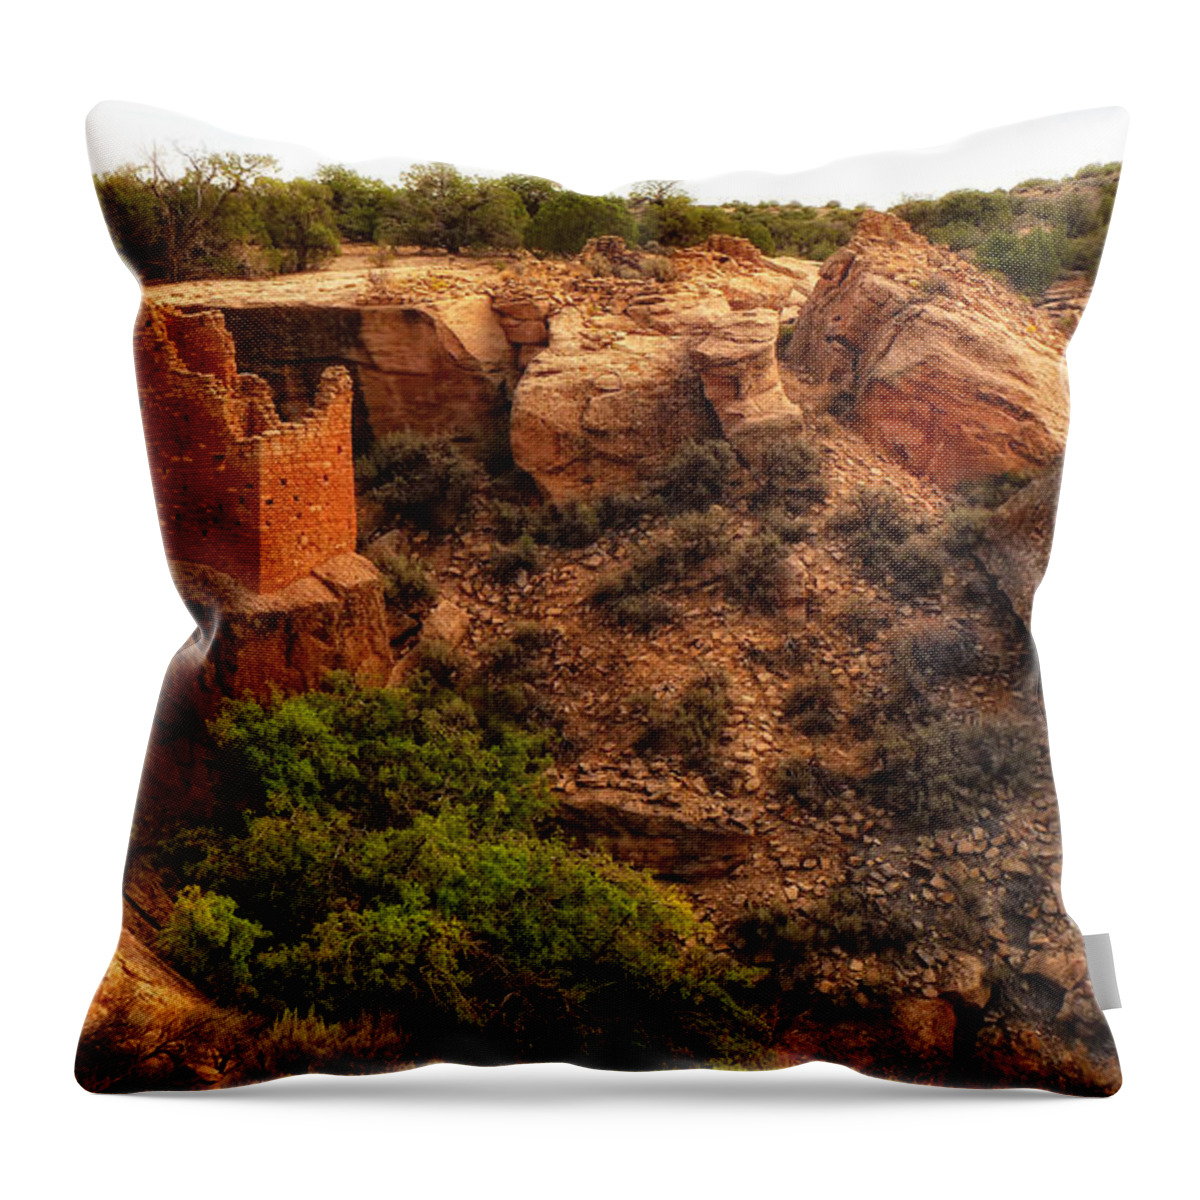 Sherry Day Throw Pillow featuring the photograph Hovenweep Dwelling by Ghostwinds Photography